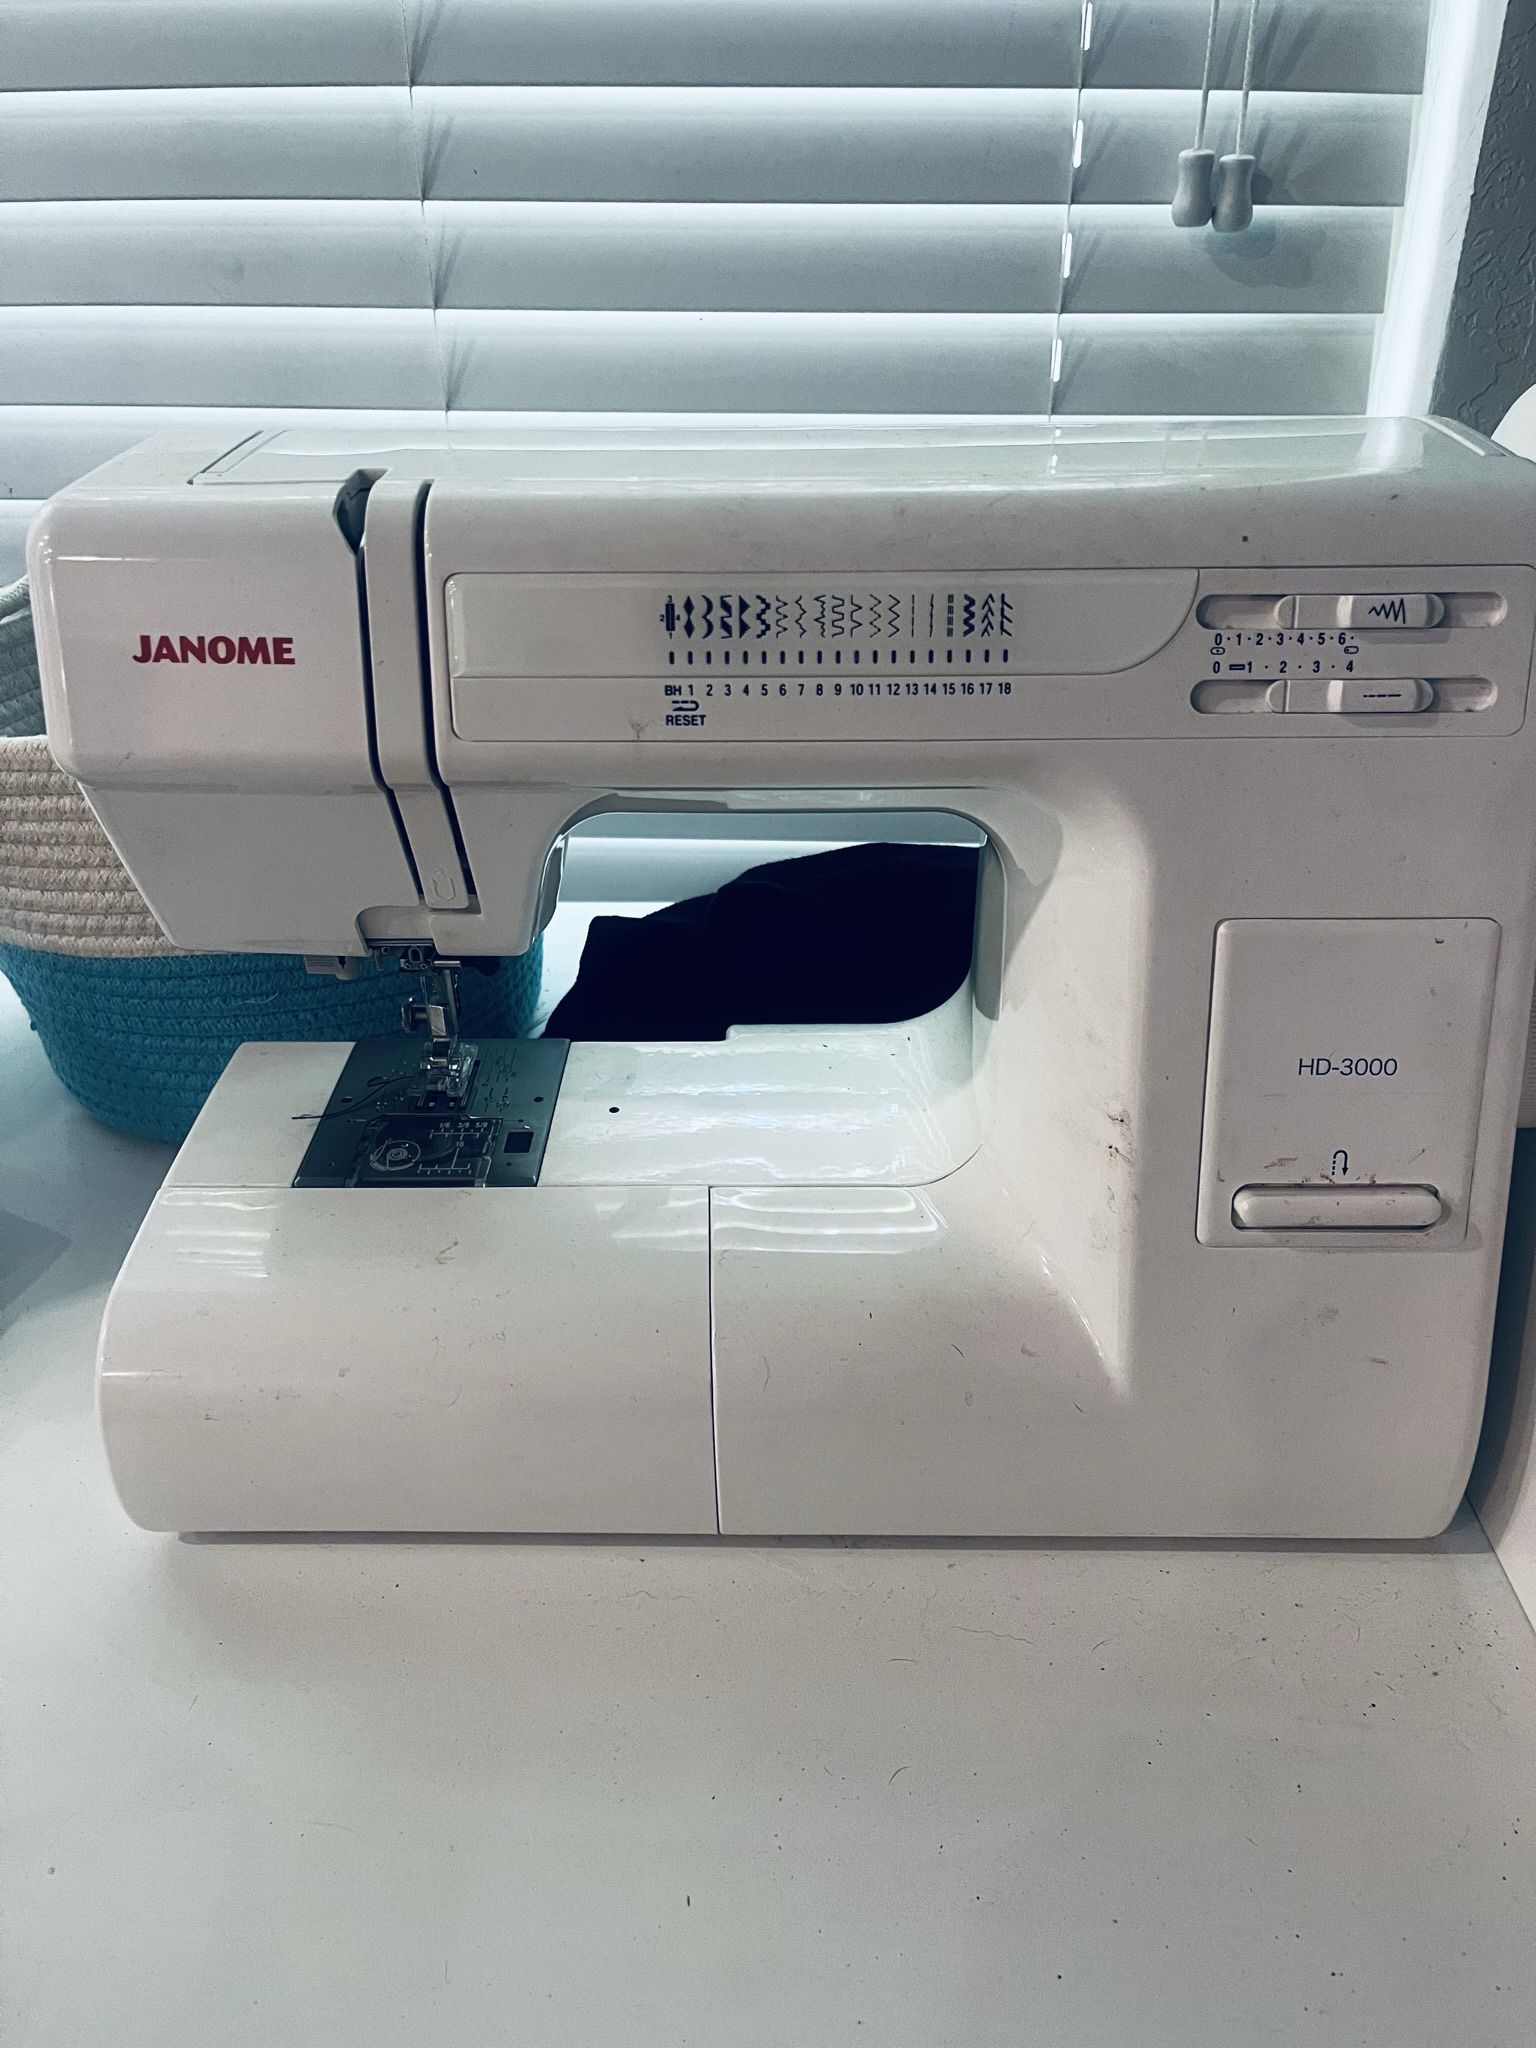 Janome HD3000 Heavy-Duty Sewing Machine with 18 Built-in Stitches + Hard  Case for Sale in Cypress, TX - OfferUp